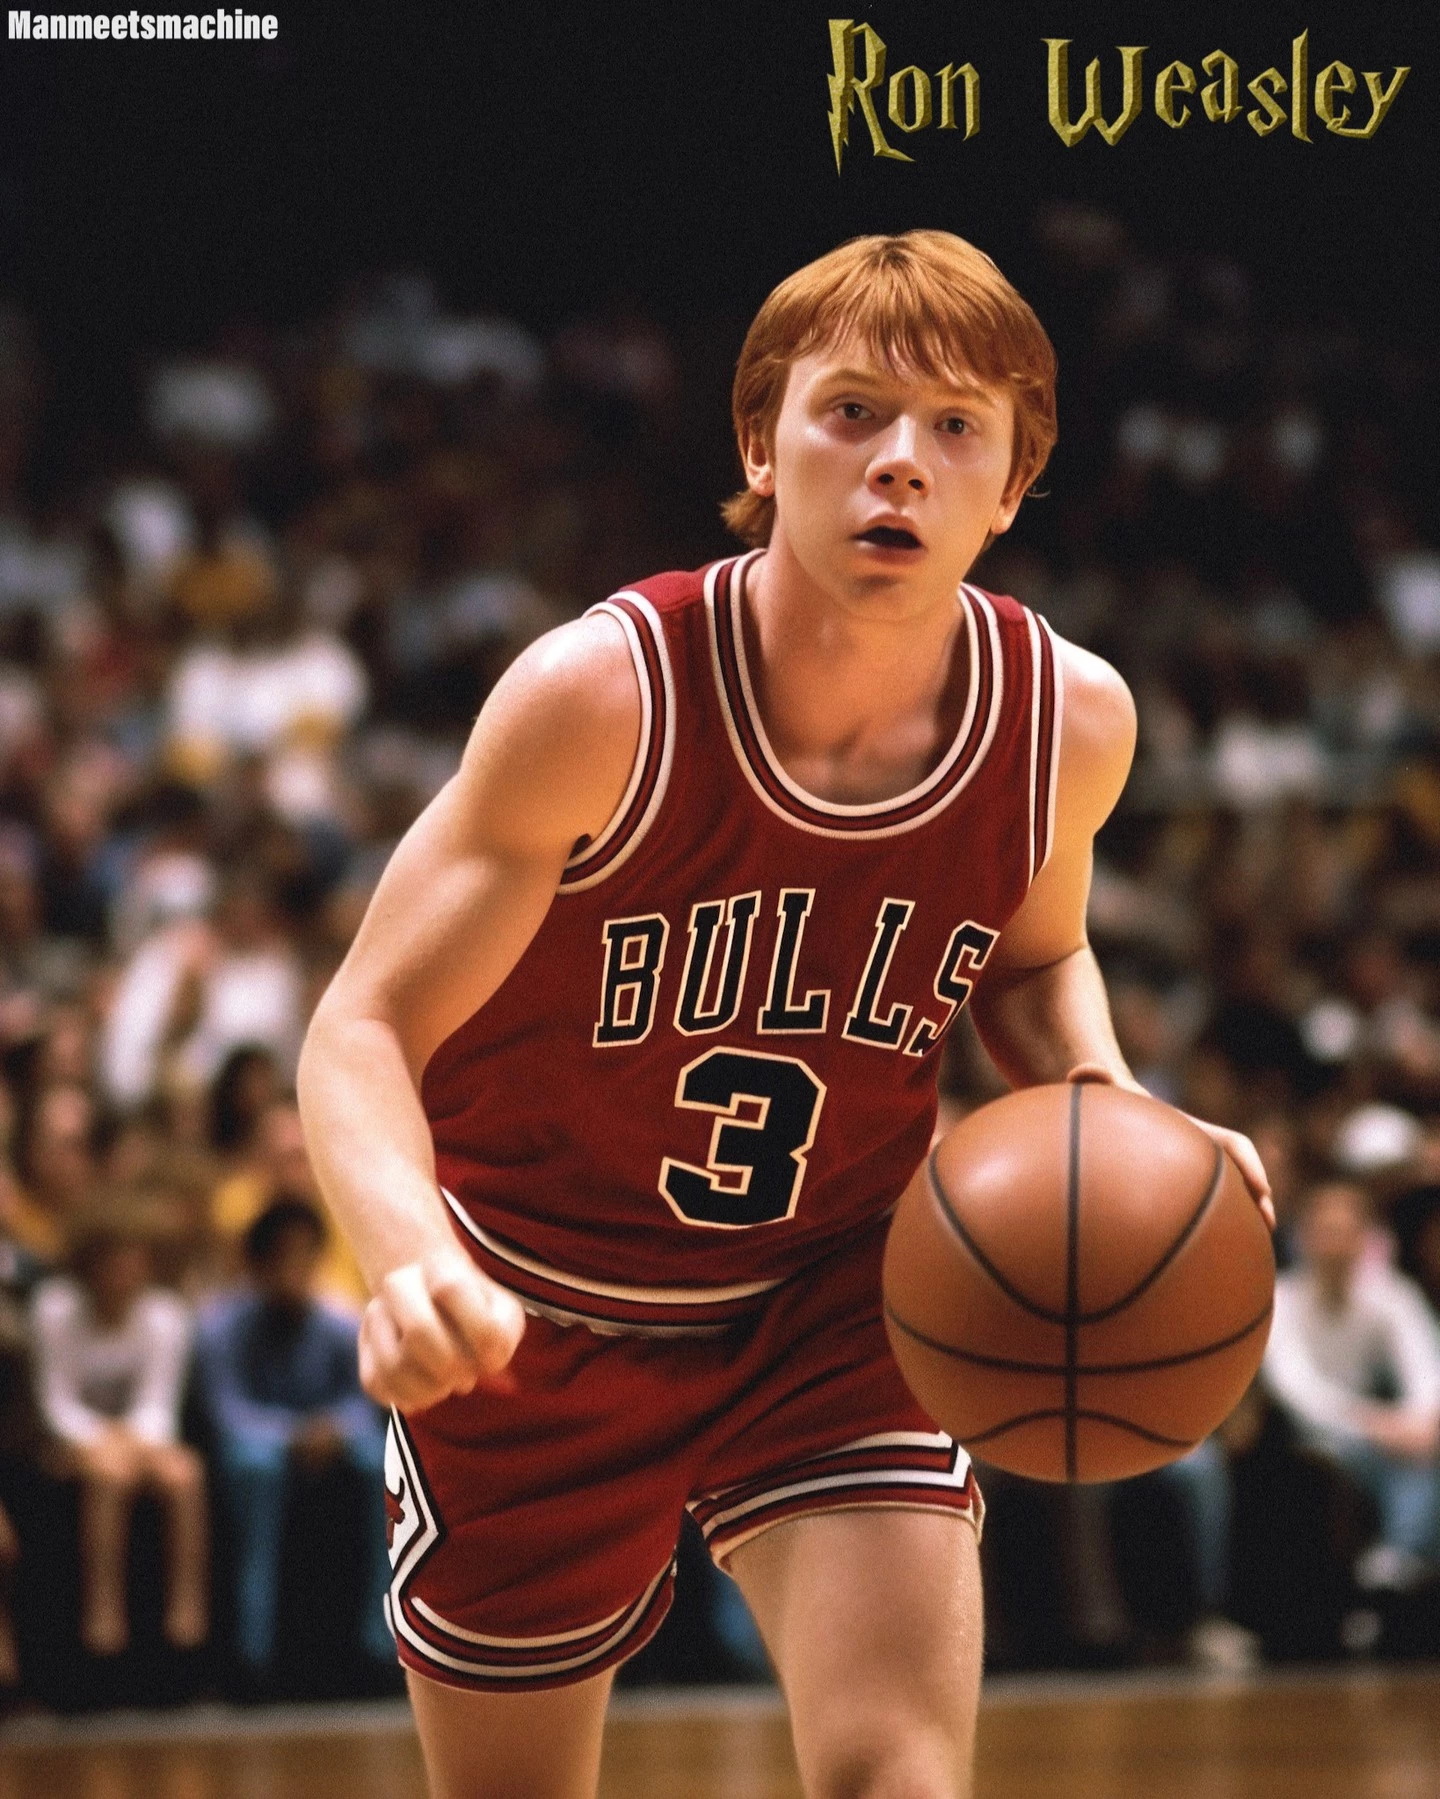 Ron Weasley Might Look A Bit Unfit, But He’s Actually One Of The Best Players On Court